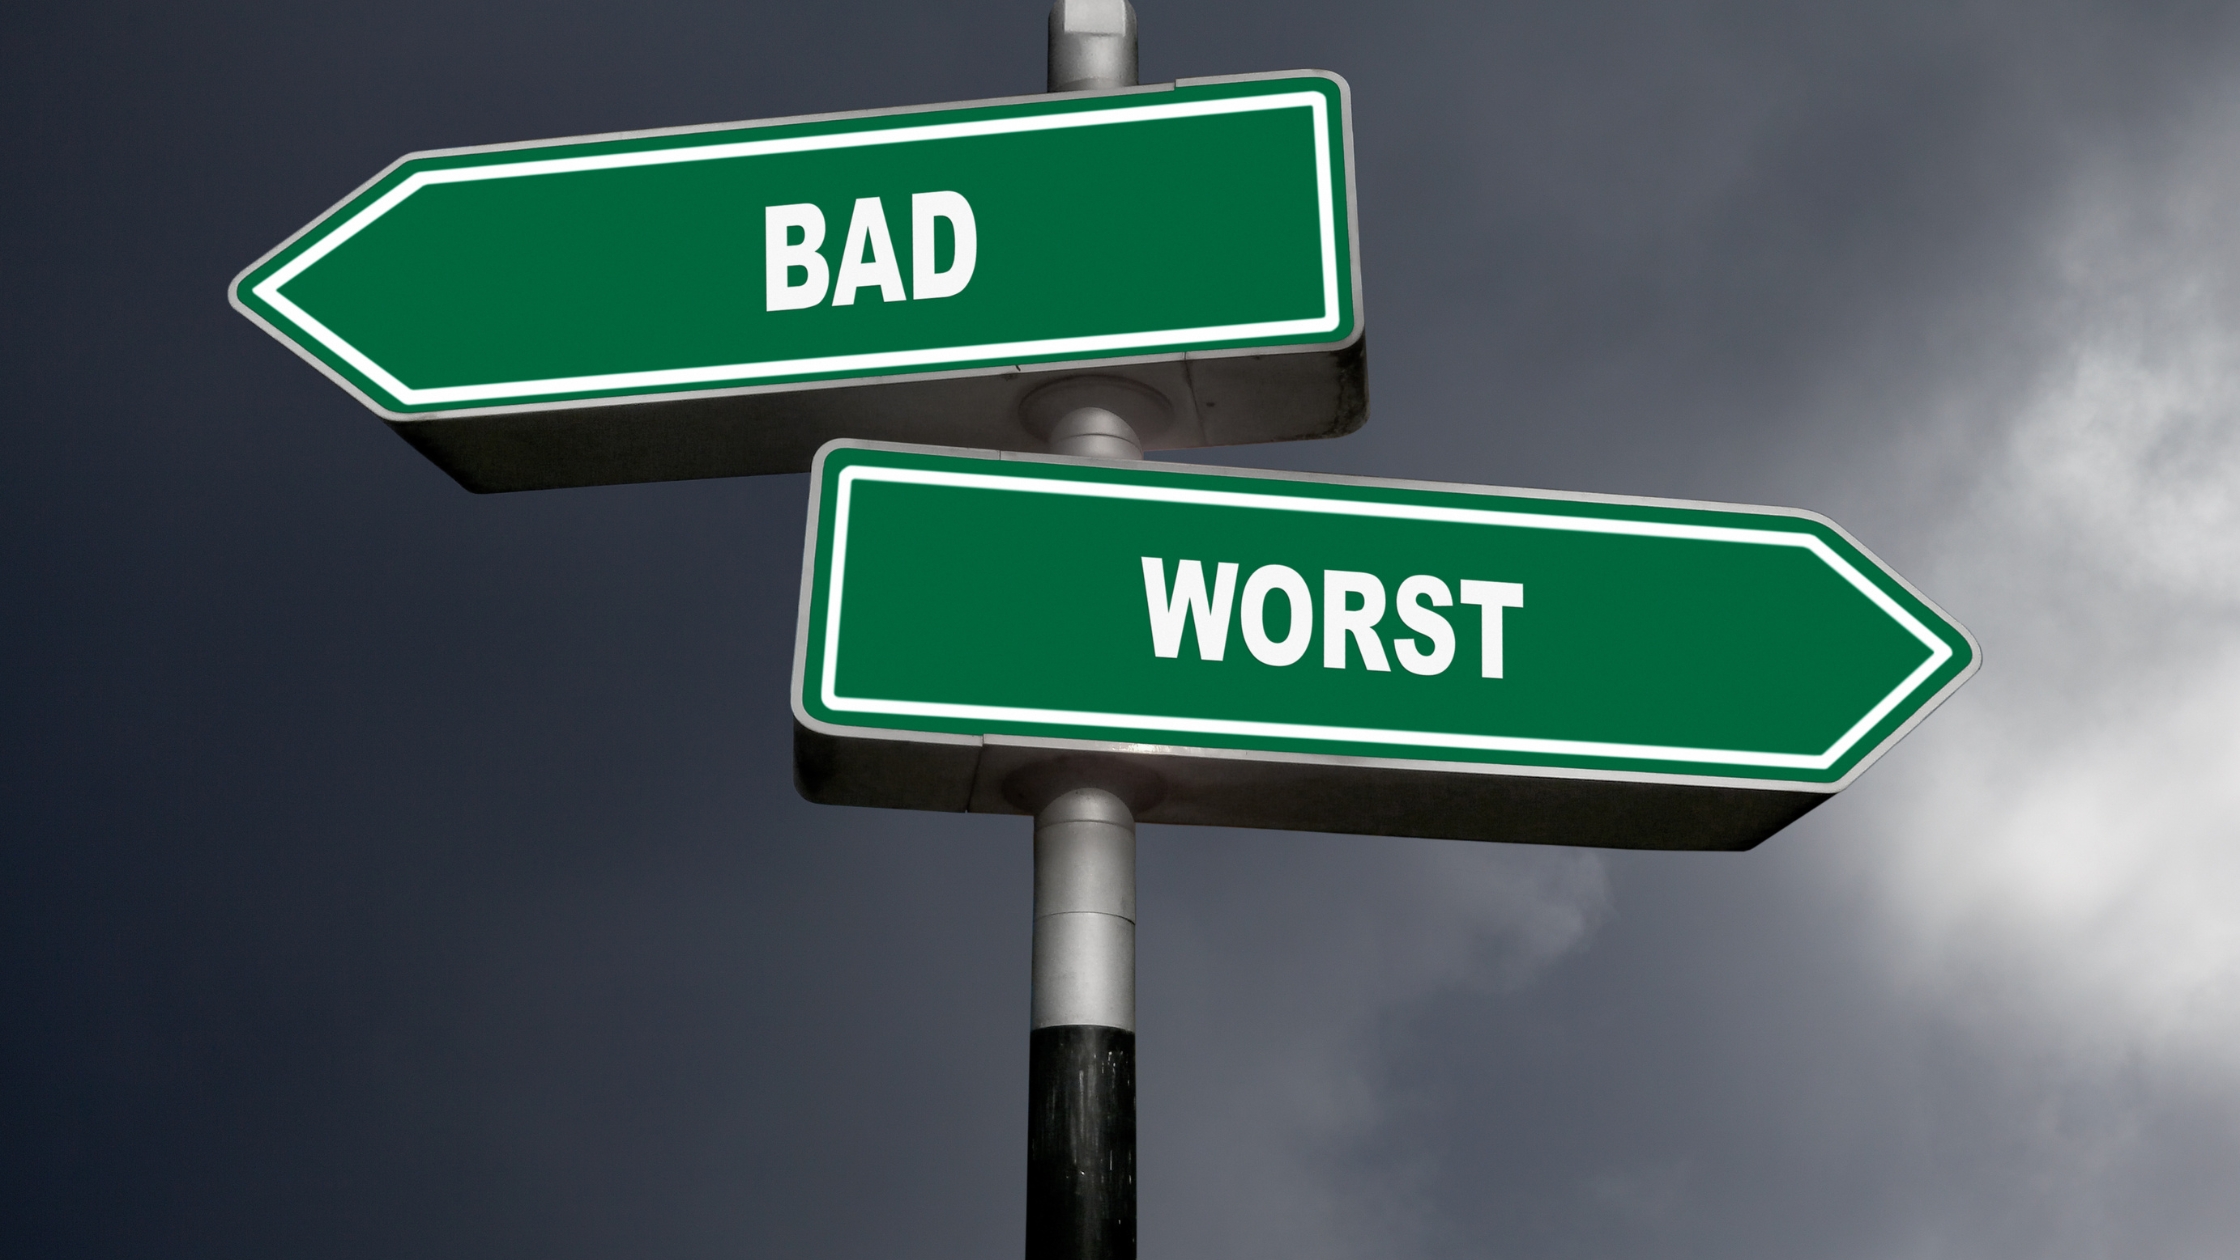 Street signs: "Bad" pointing left, "Worse" pointing right, representing the path from slow payer to bad debt.